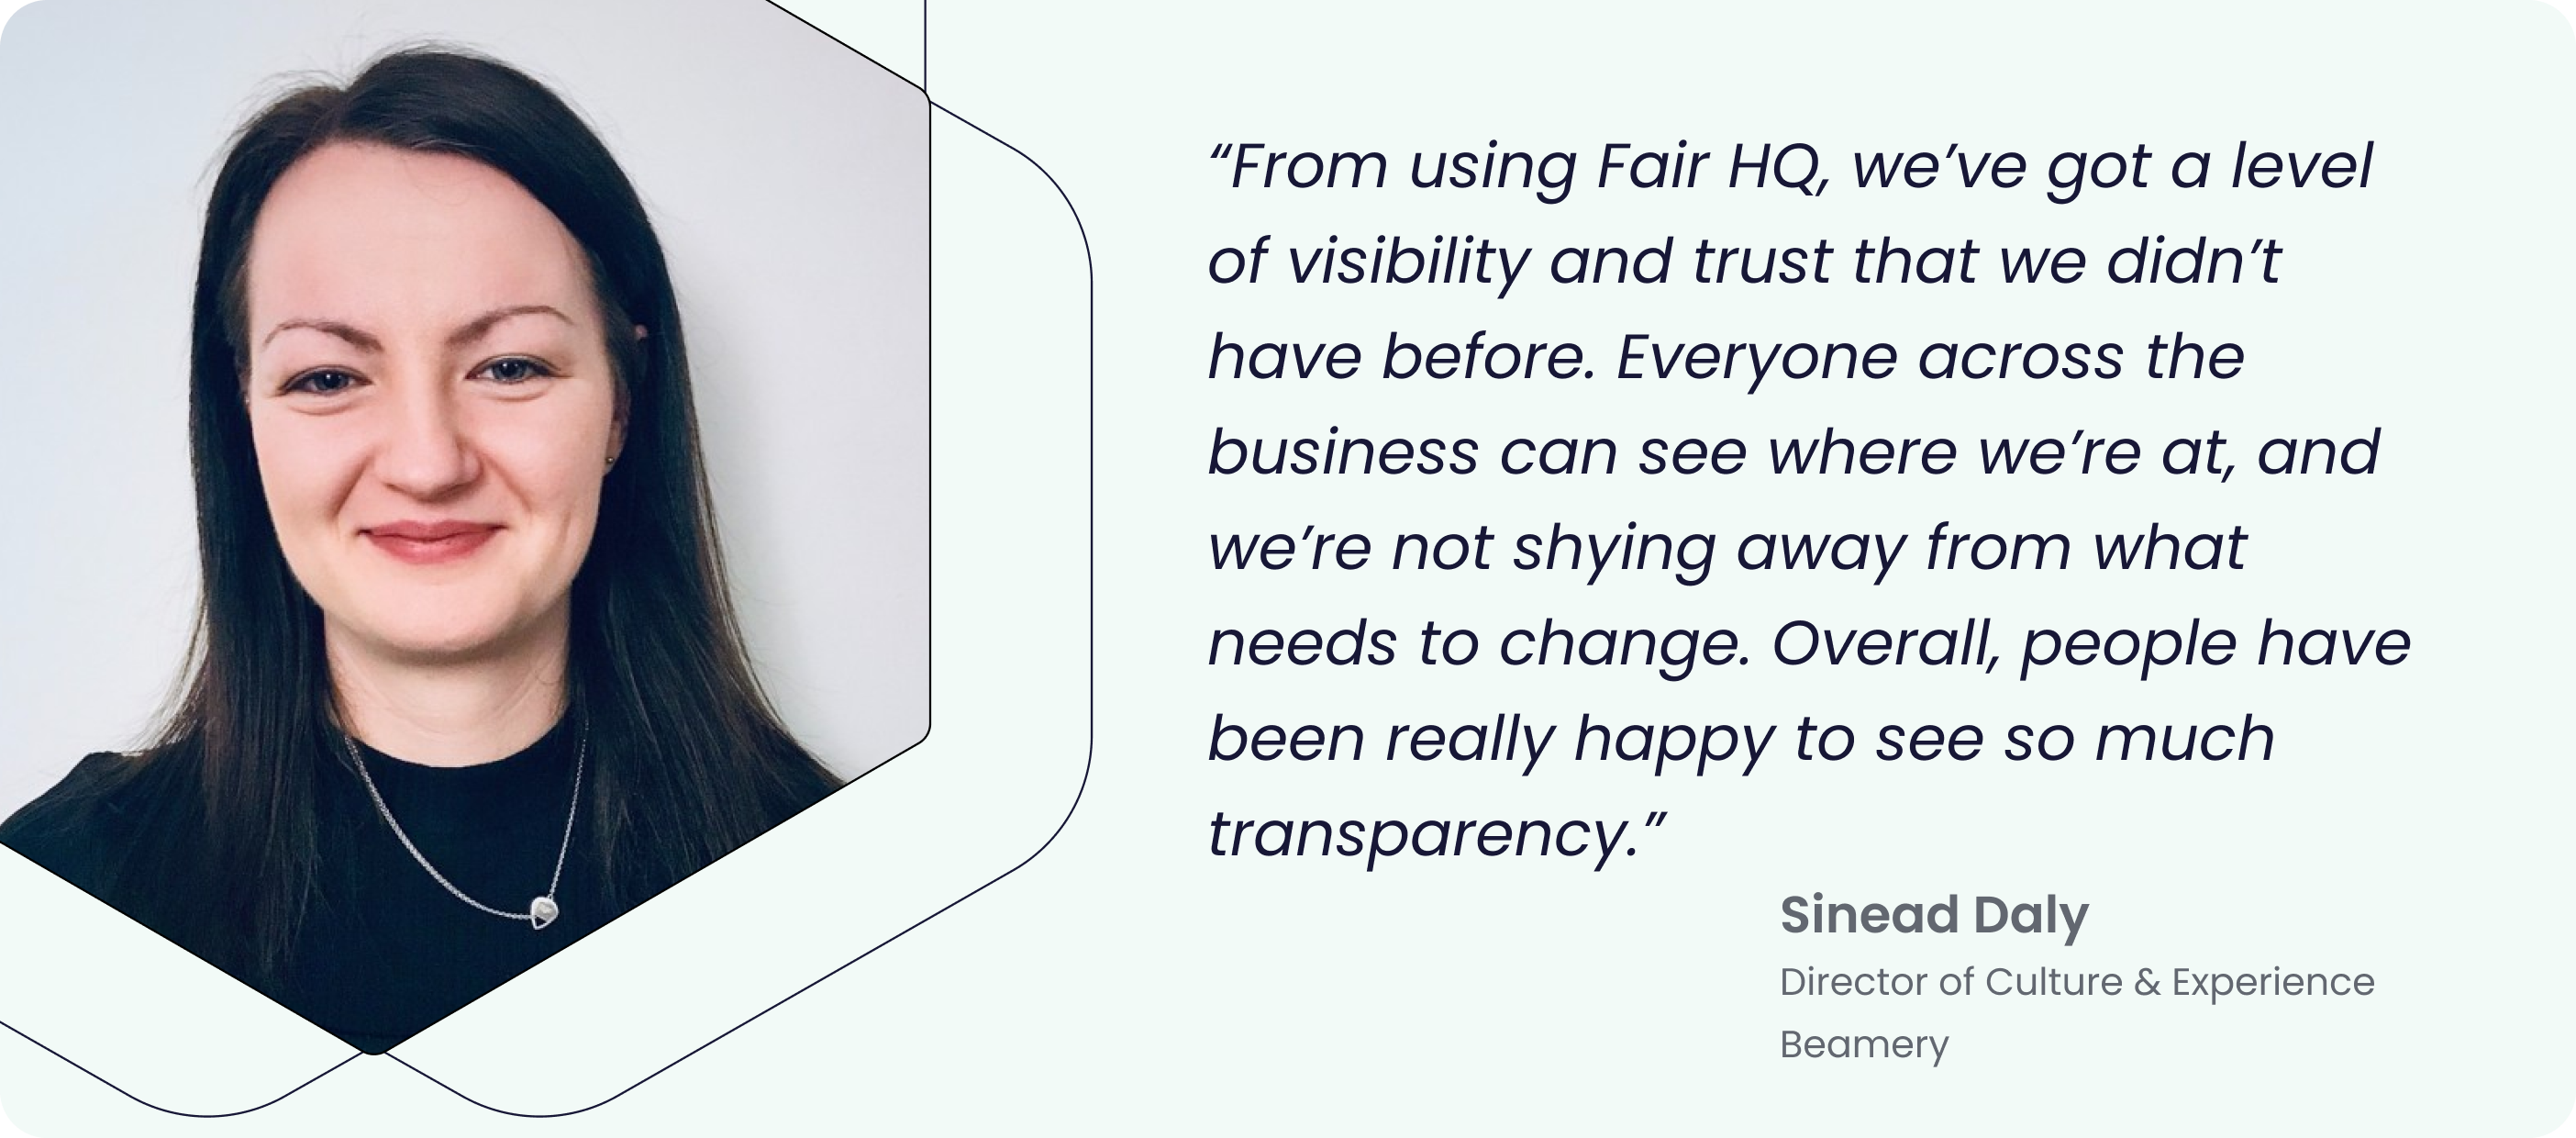 “From using Fair HQ, we’ve got a level of visibility and trust that we didn’t have before. Everyone across the business can see where we’re at, and we’re not shying away from what needs to change. Overall, people have been really happy to see so much transparency.” - Sinead Daly, Director of Culture and Experience at Beamery.